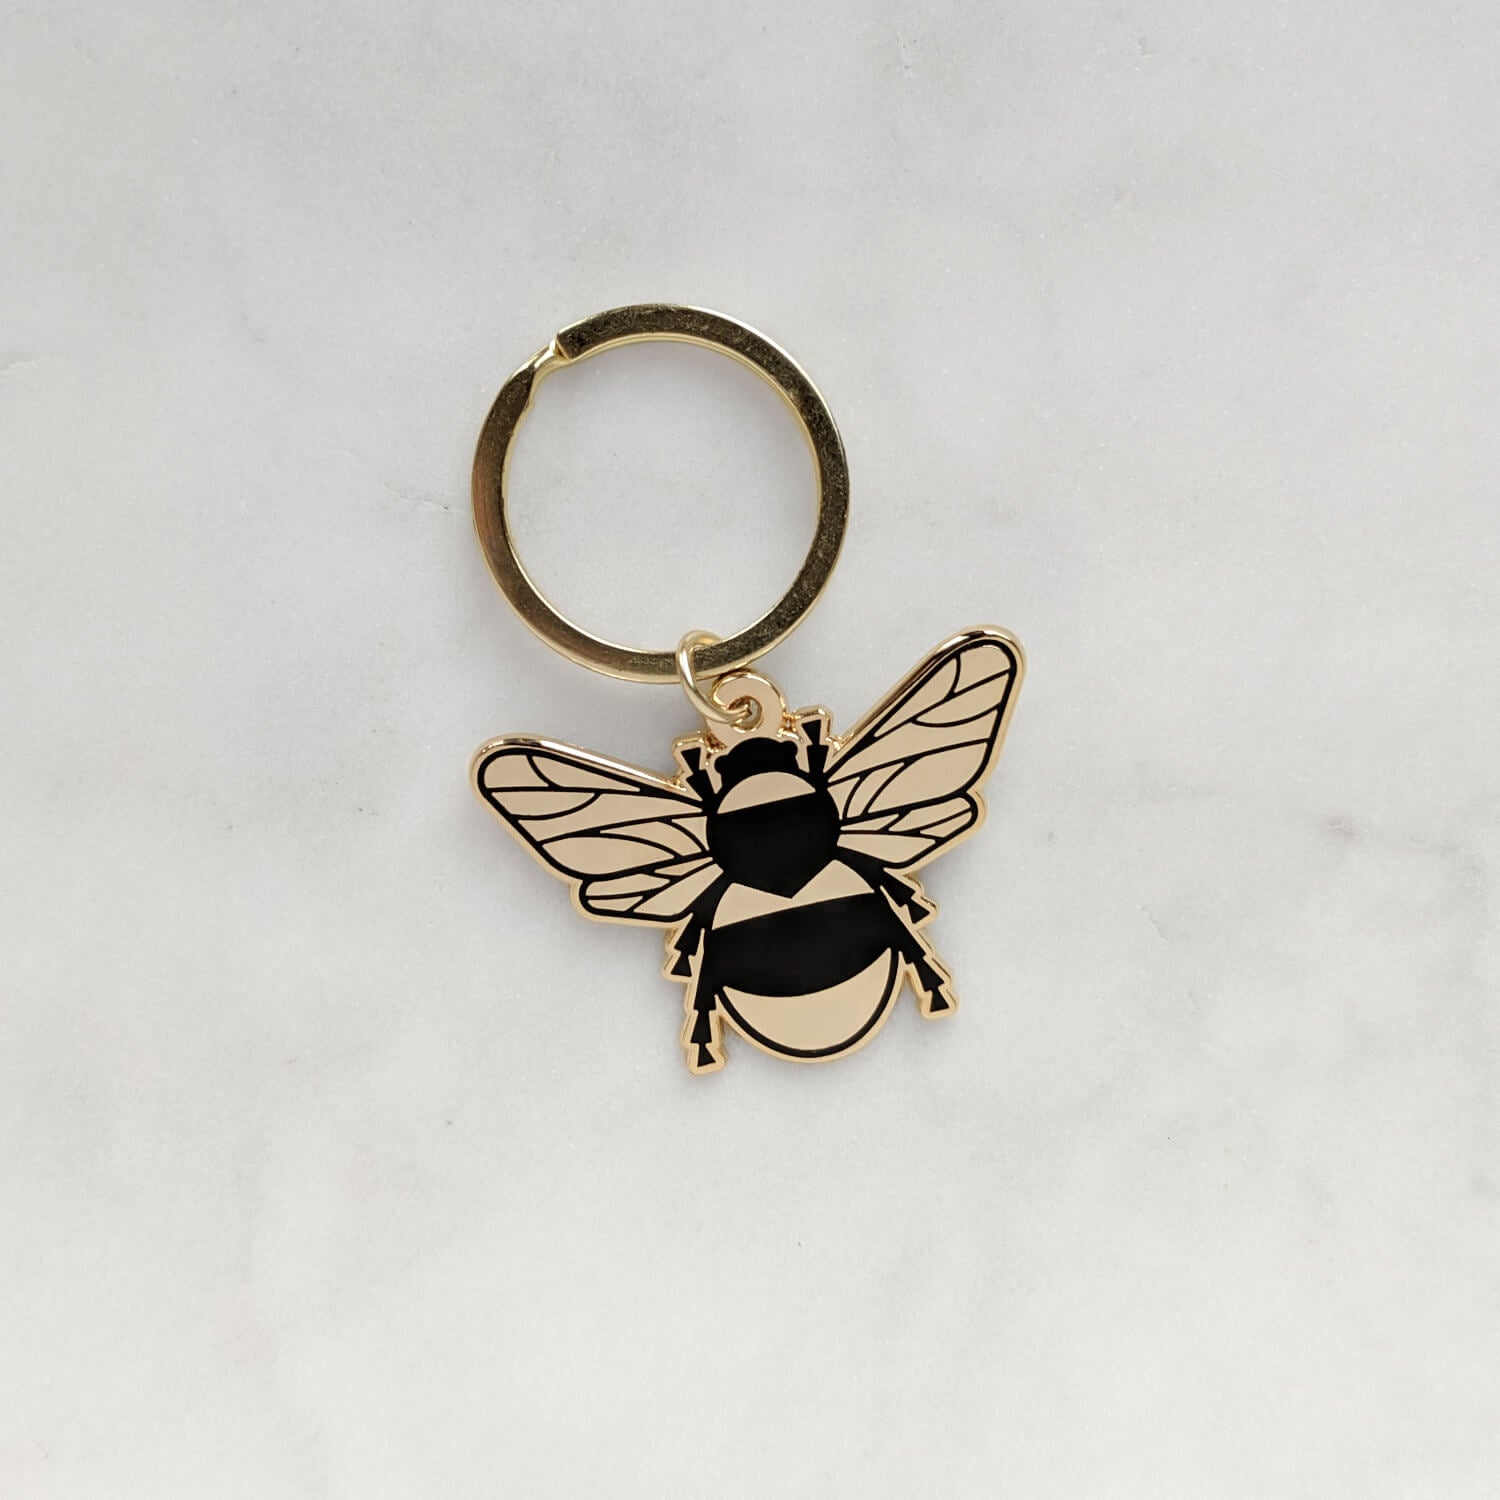 Bumble Bee Keychain - The Moonlit Press